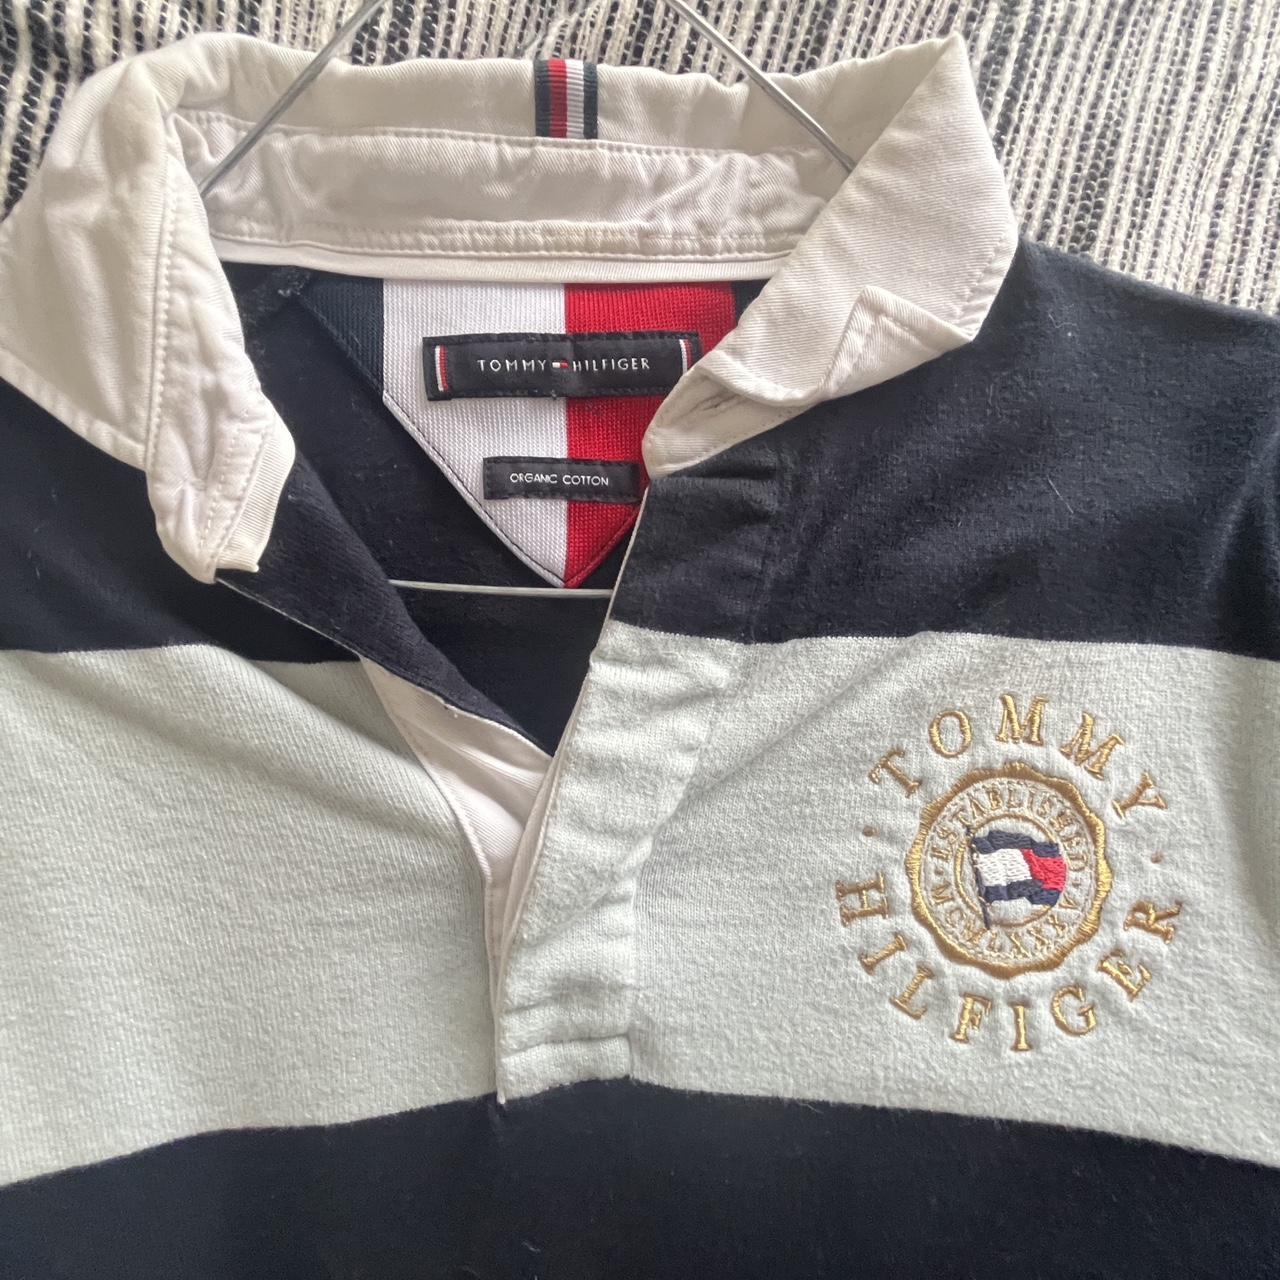 Tommy Hilfiger Polo Crew Neck Perfect Condition - Depop